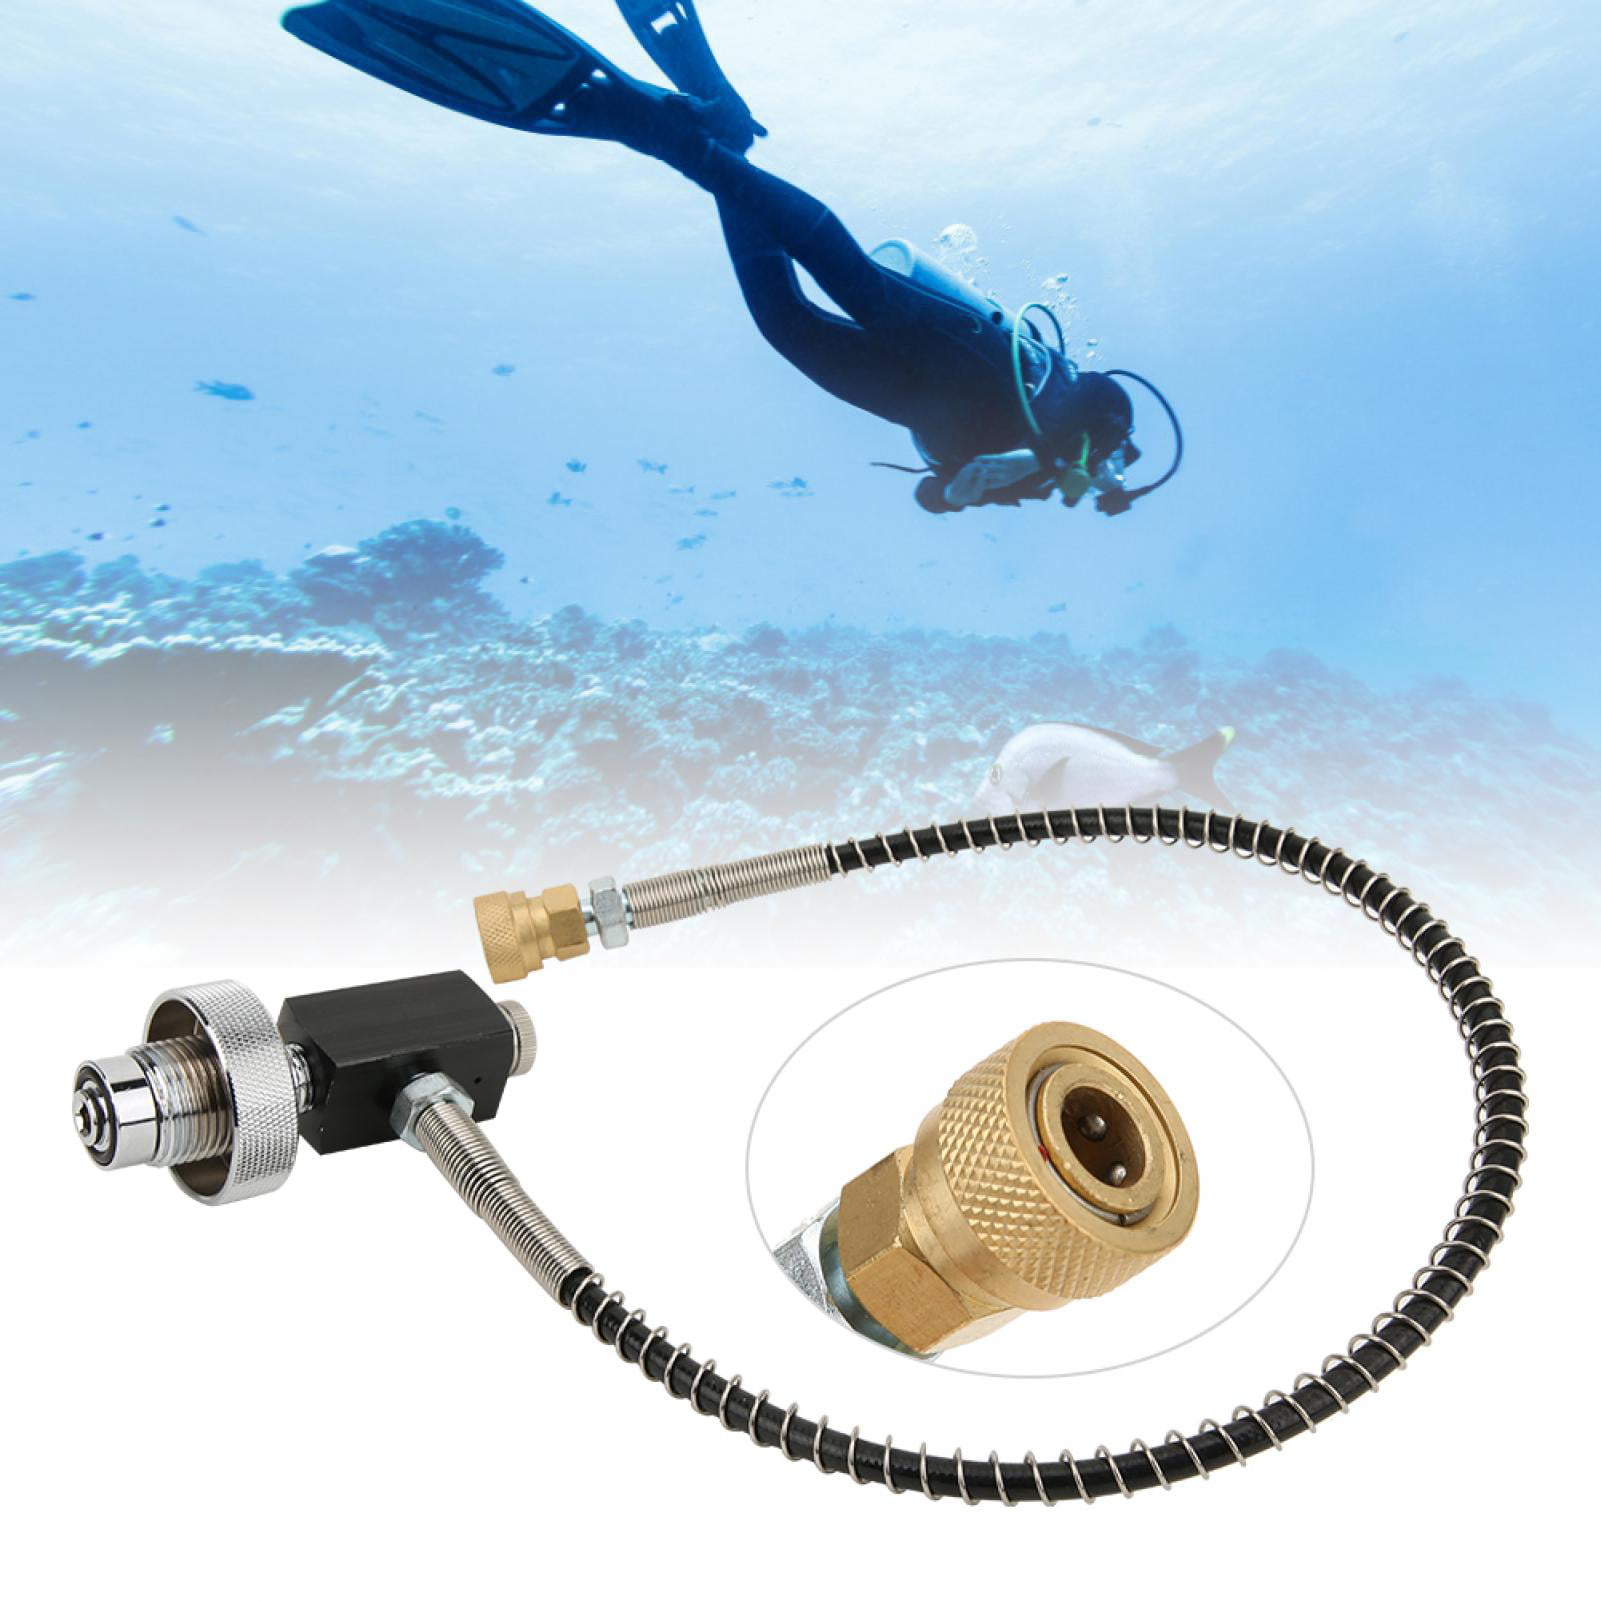 Details about   Lightweight Diving Valve Air Filling High Pressure Hose Adapter Underwater Equip 